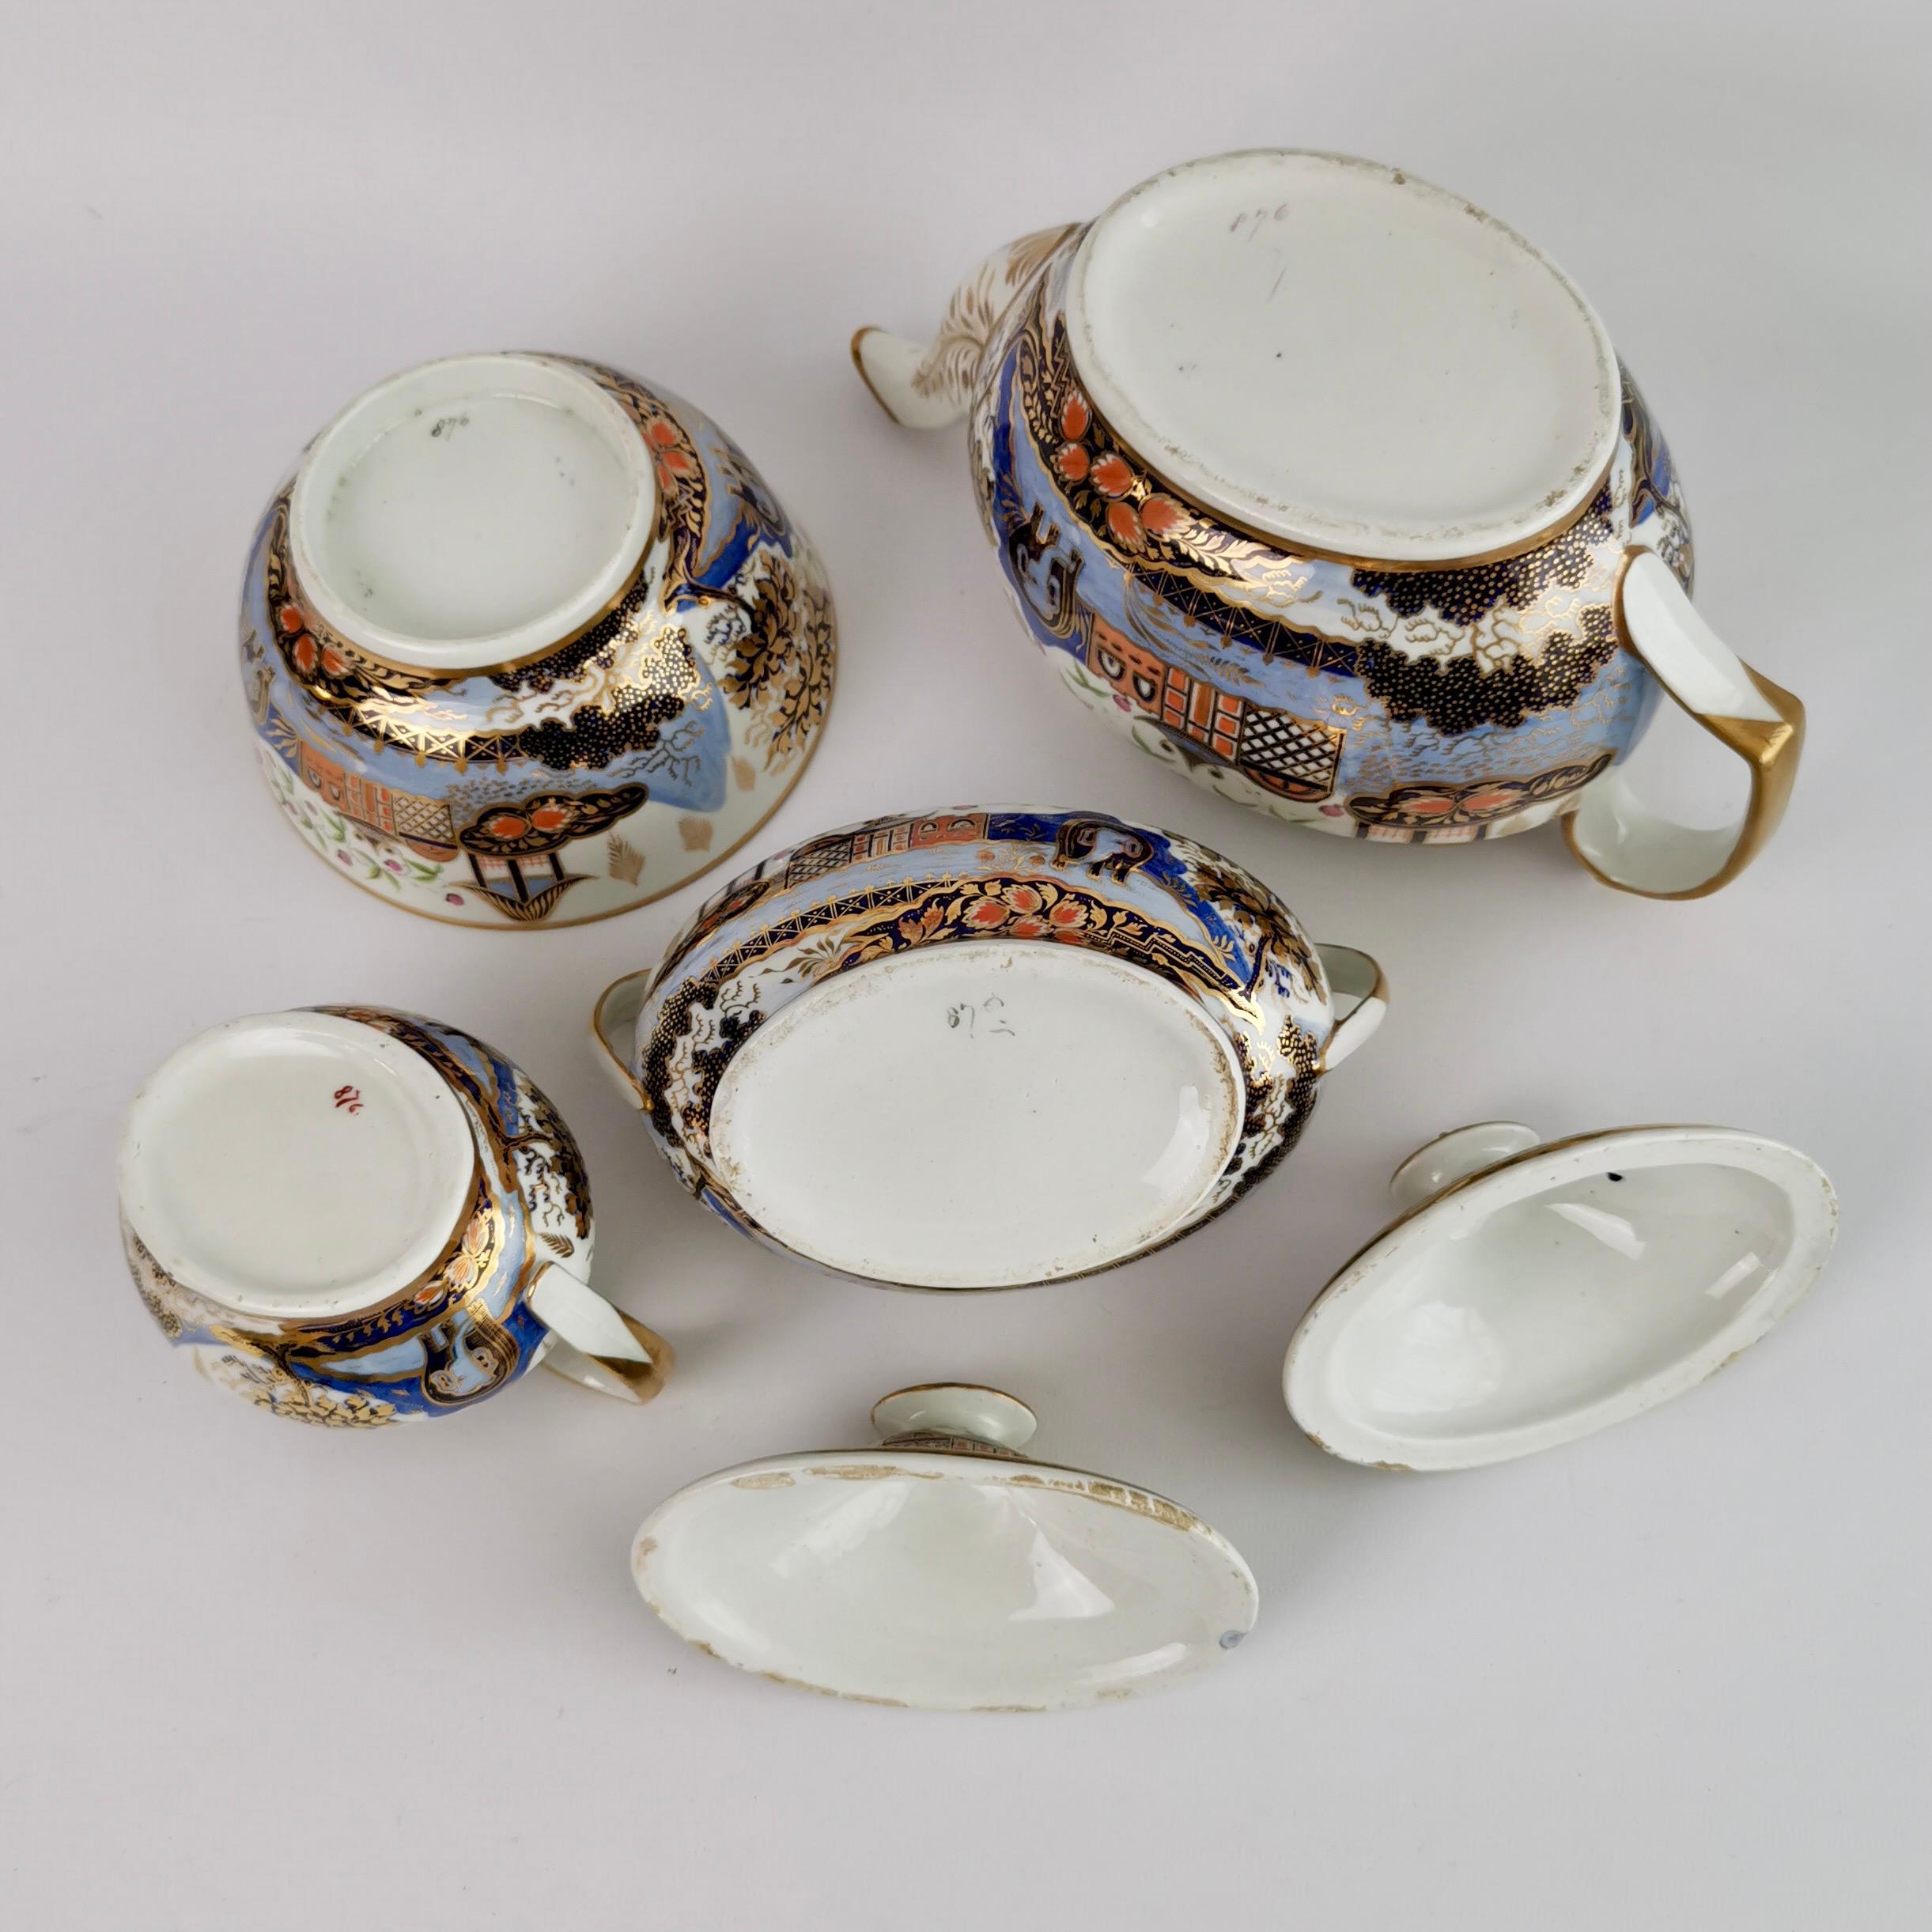 New Hall Tea Service for Four, Elephant Pattern 876, Regency ca 1810 For Sale 10